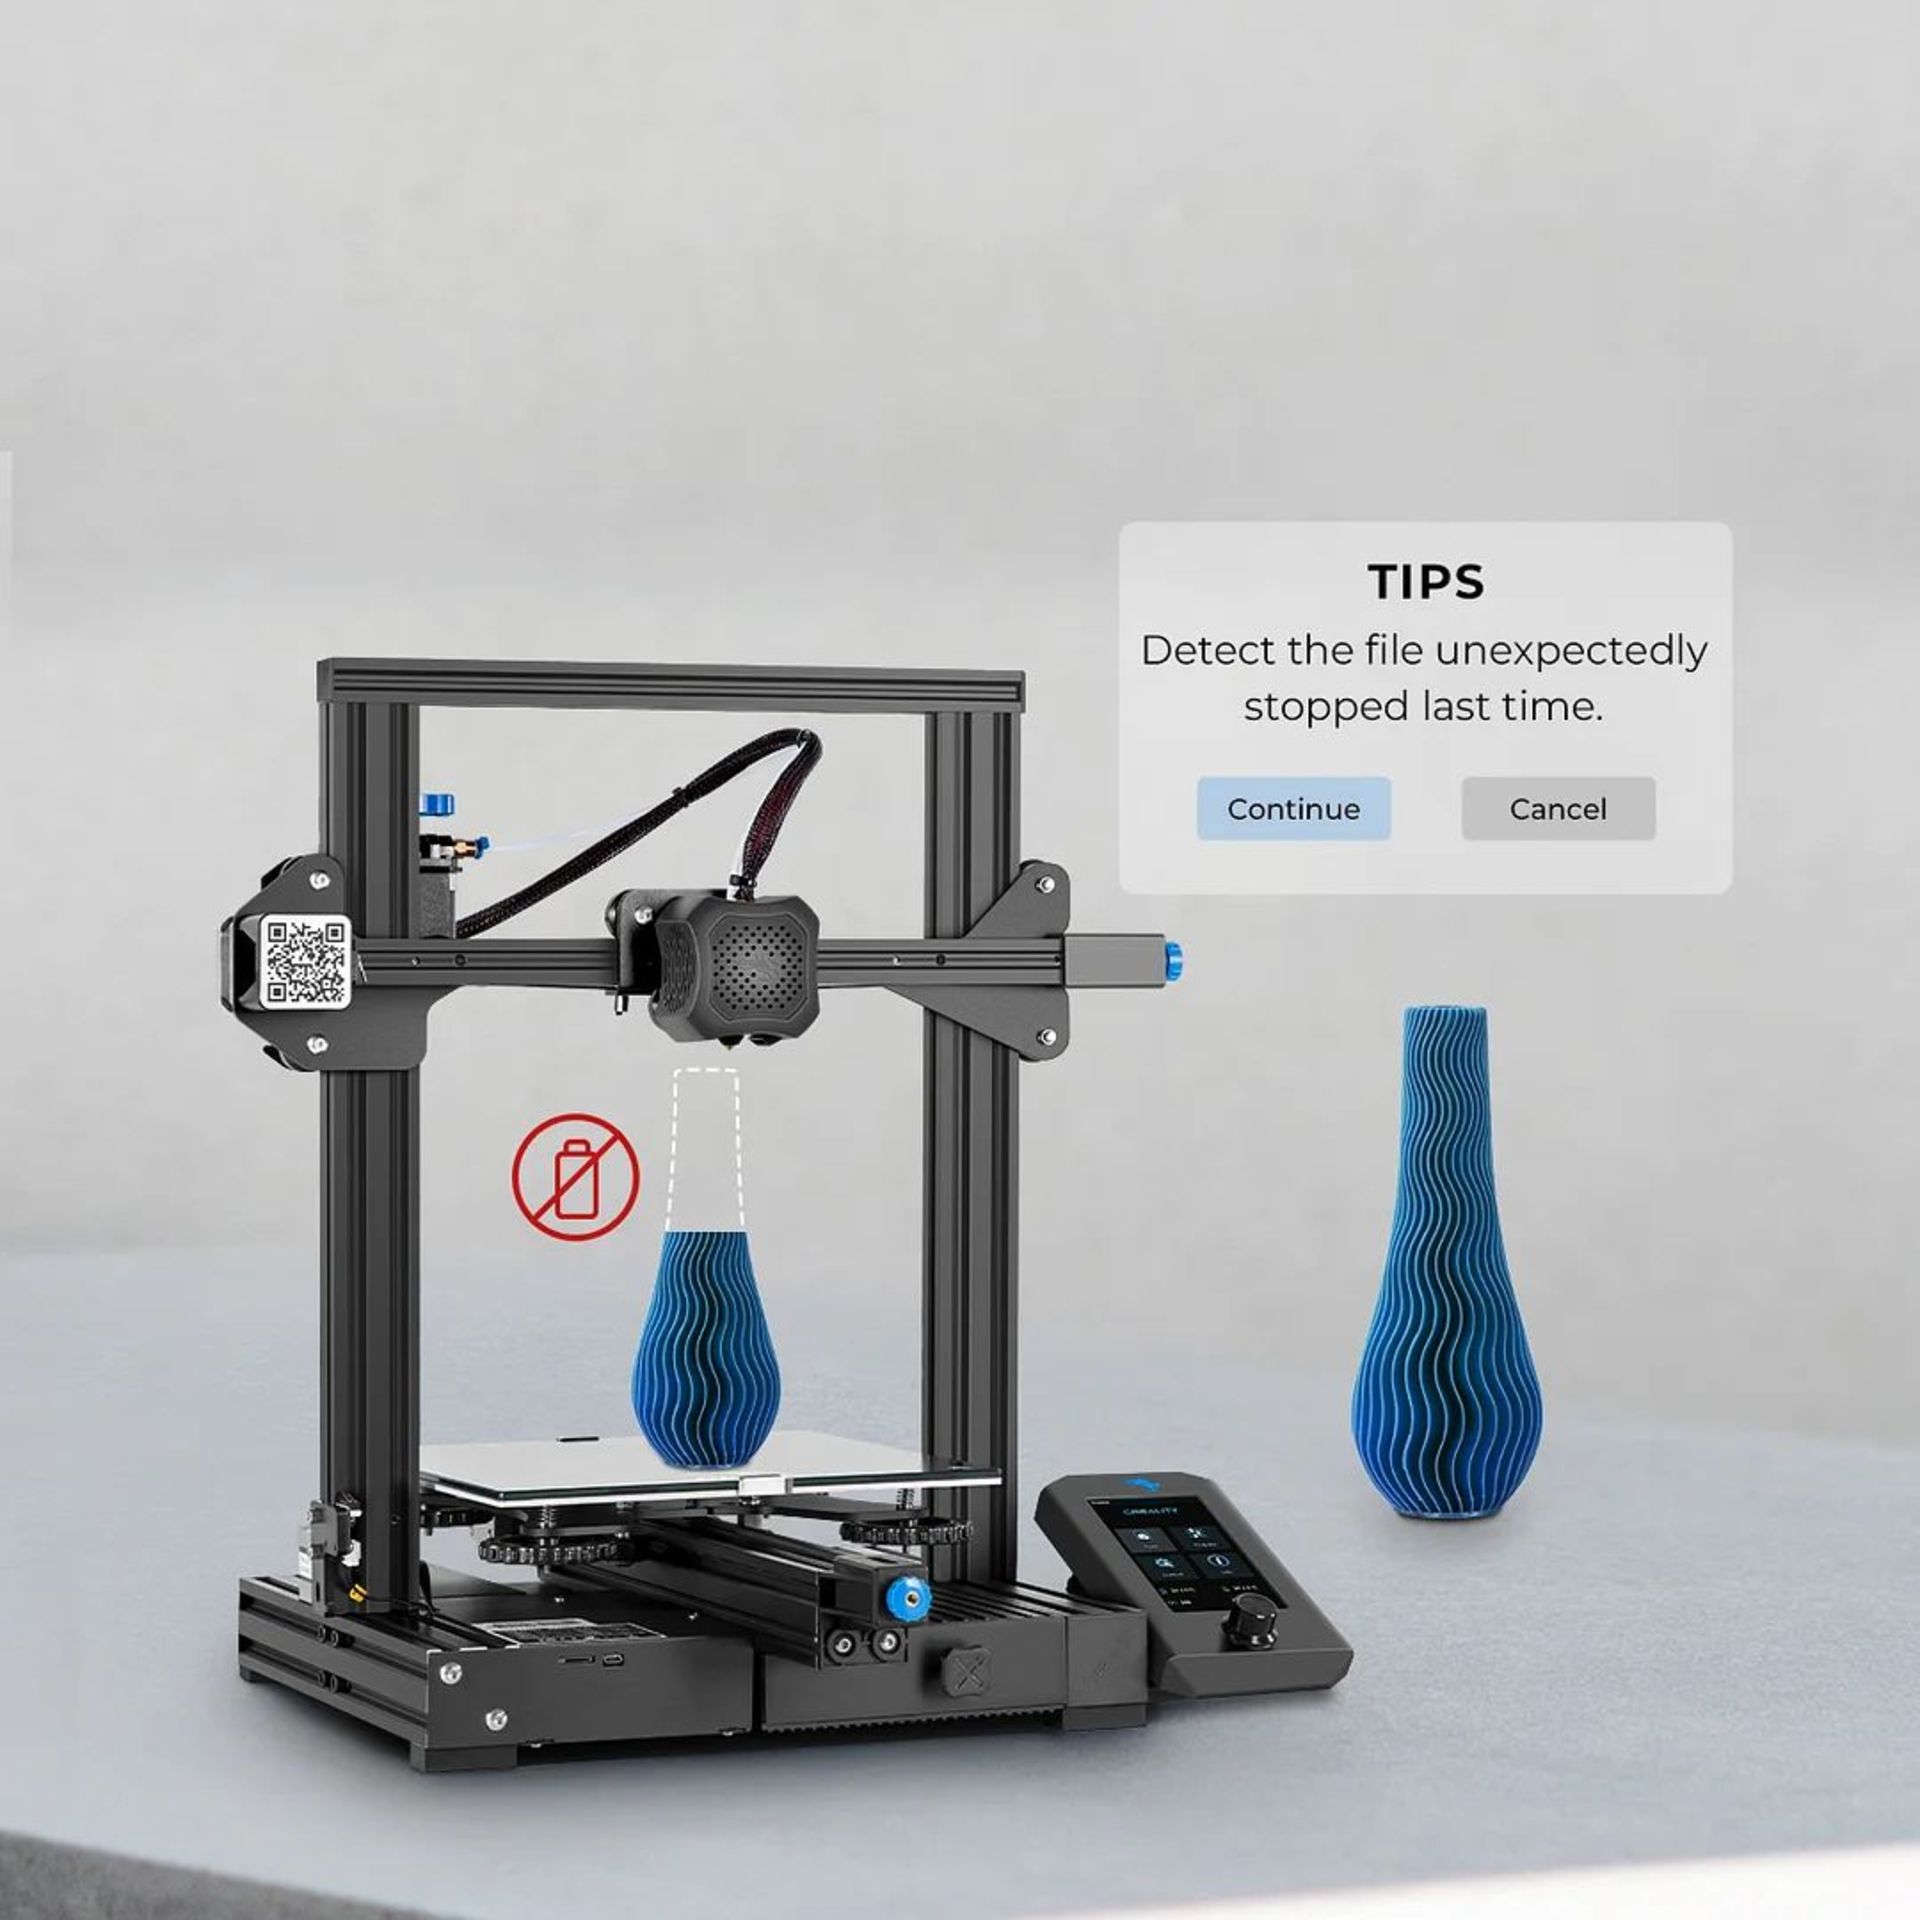 Creality Ender-3 V2 3D Printer. - PCKBW. RRP £319.00. 4.3-inch HD color screen for new UI - Image 2 of 2